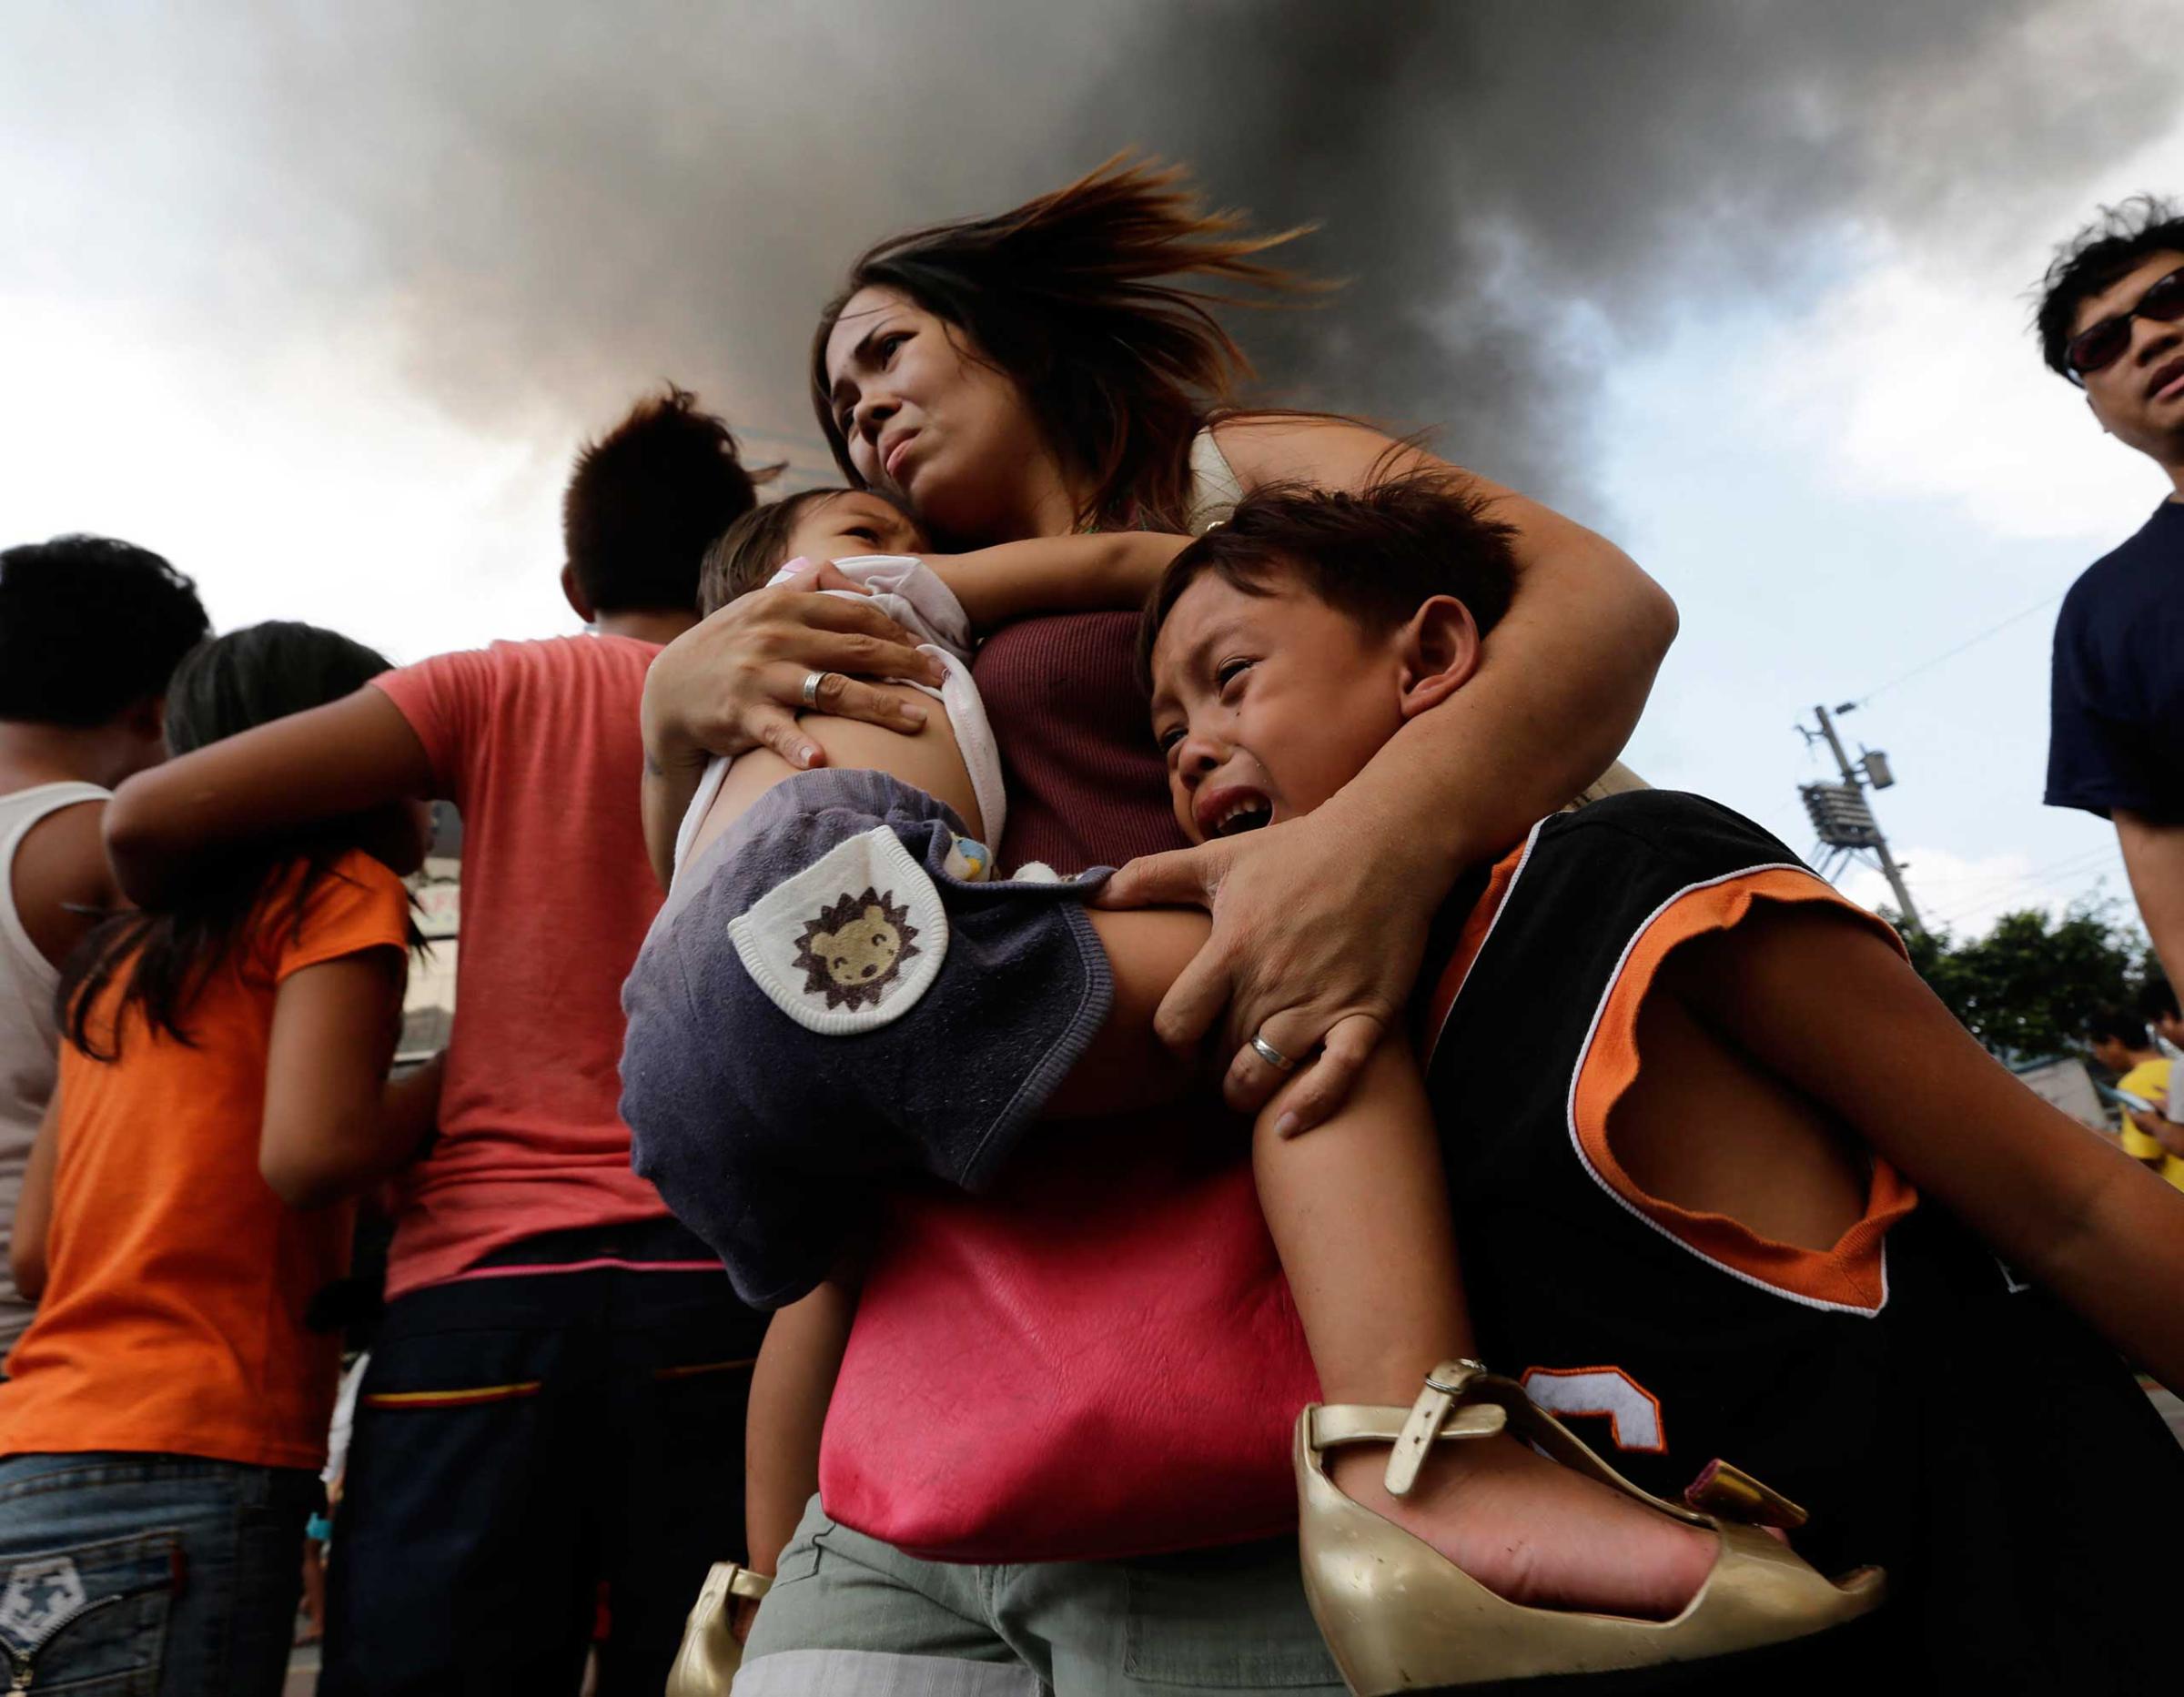 A Filipino mother carries her children while their house is on fire in a residential slum area in Manila, Philippines, April 29, 2014. The Manila Fire Department said that the fire left more than thirty families homeless and three residents were hurt.